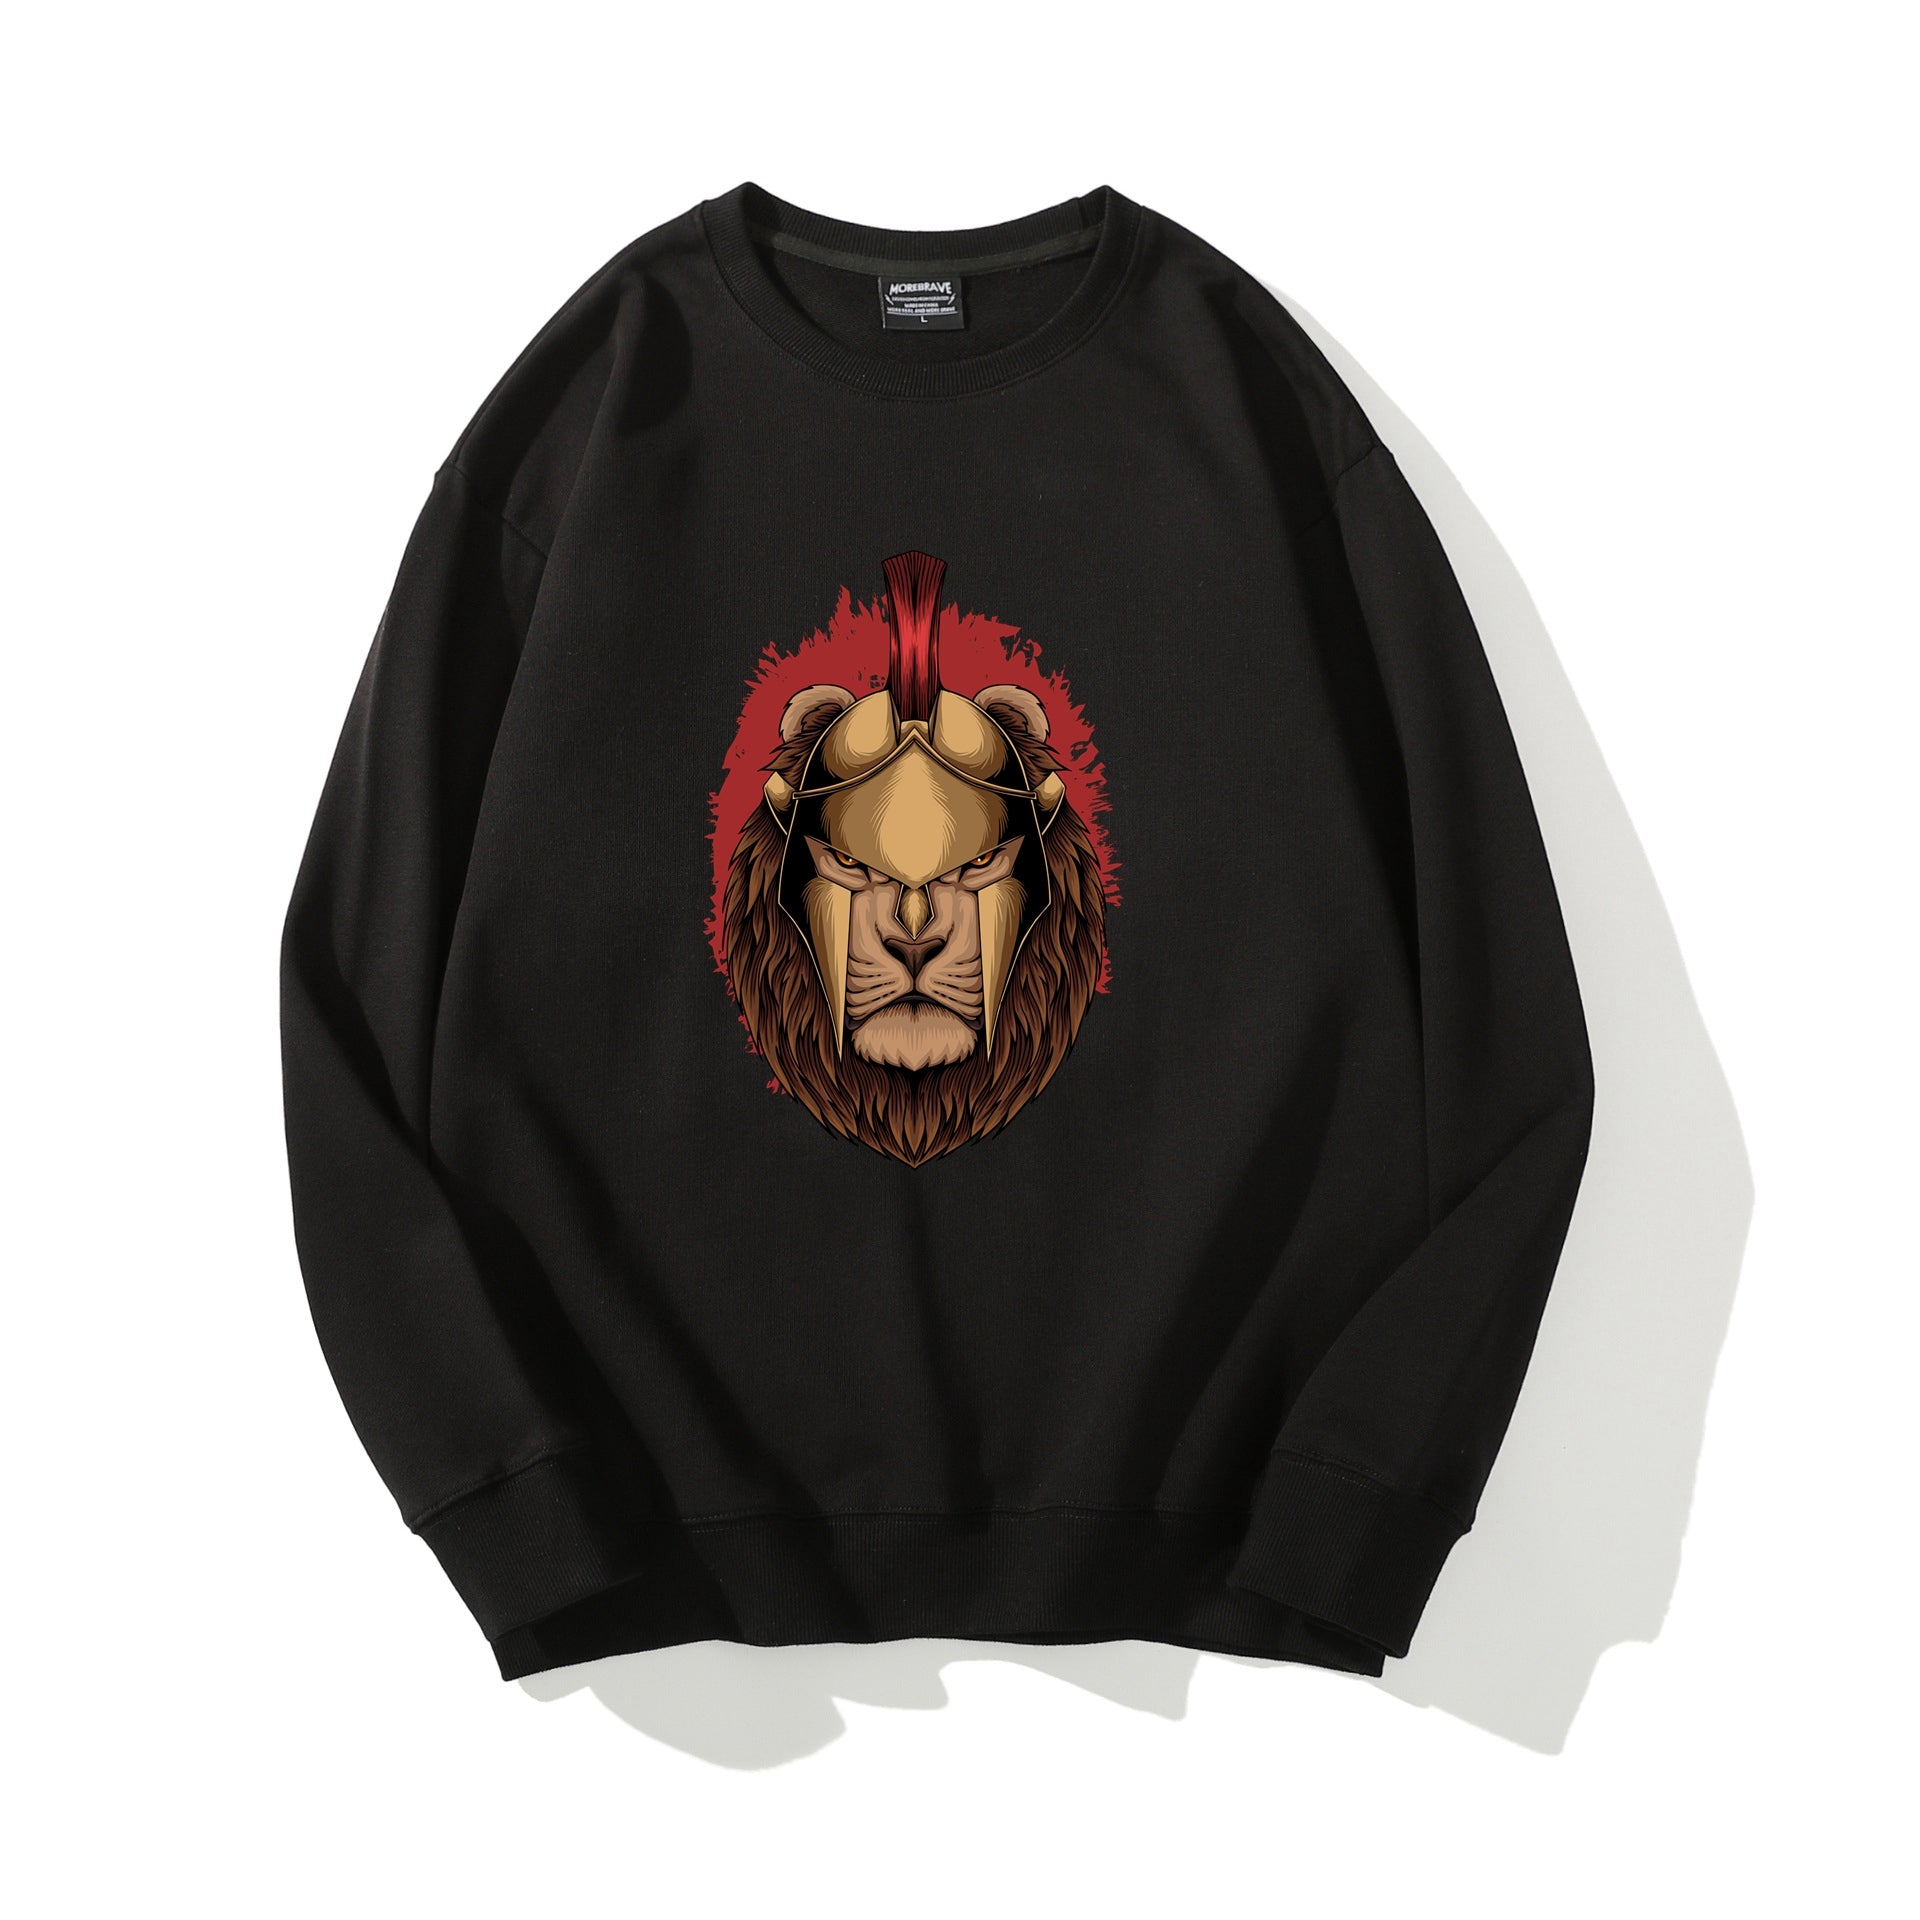 Masked Lion Graphic Print Crew Neck Sweatshirt for Men Cotton Tops Long Sleeves